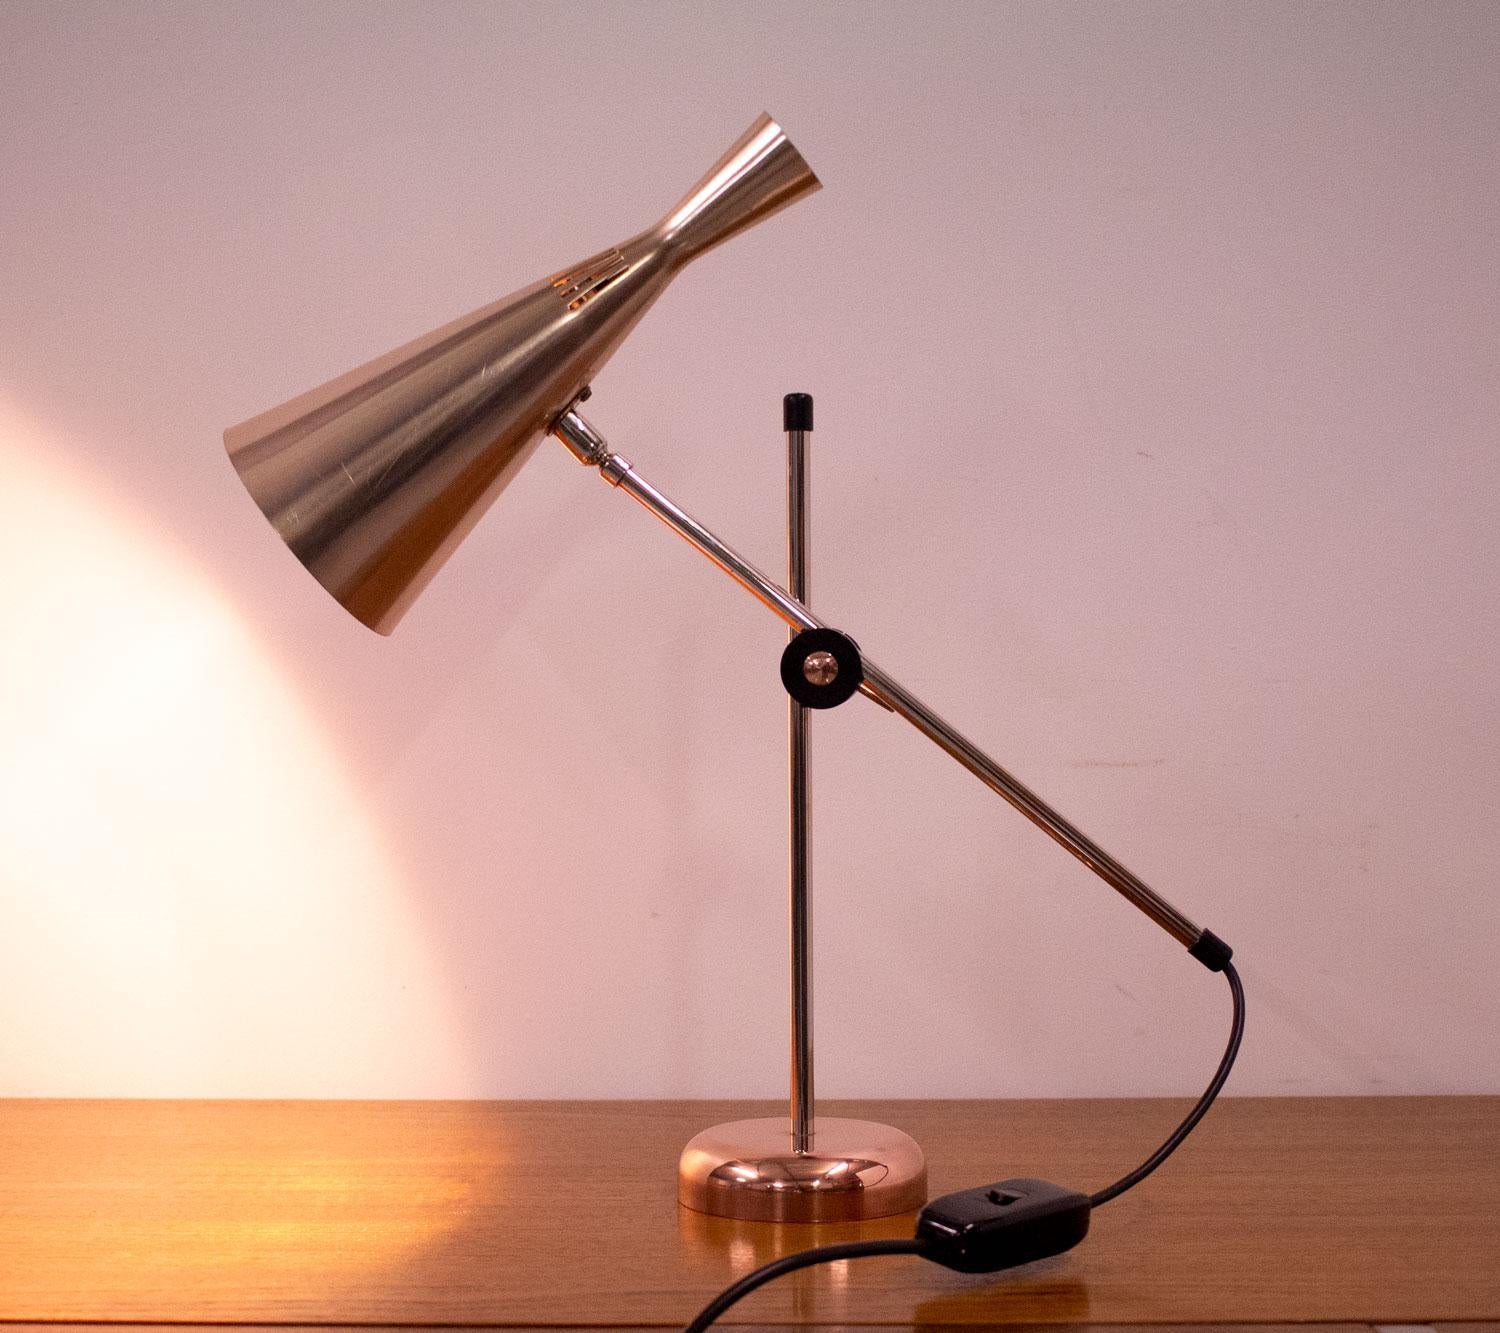 Striking desk lamp designed by G A Scott in 1958 for Maclamp with a copper plated aluminium shade, chrome plated adjustable arm and stem and a solid copper base. Rare to find with this copper base.

Stem height: 32cm
Maximum extended height: